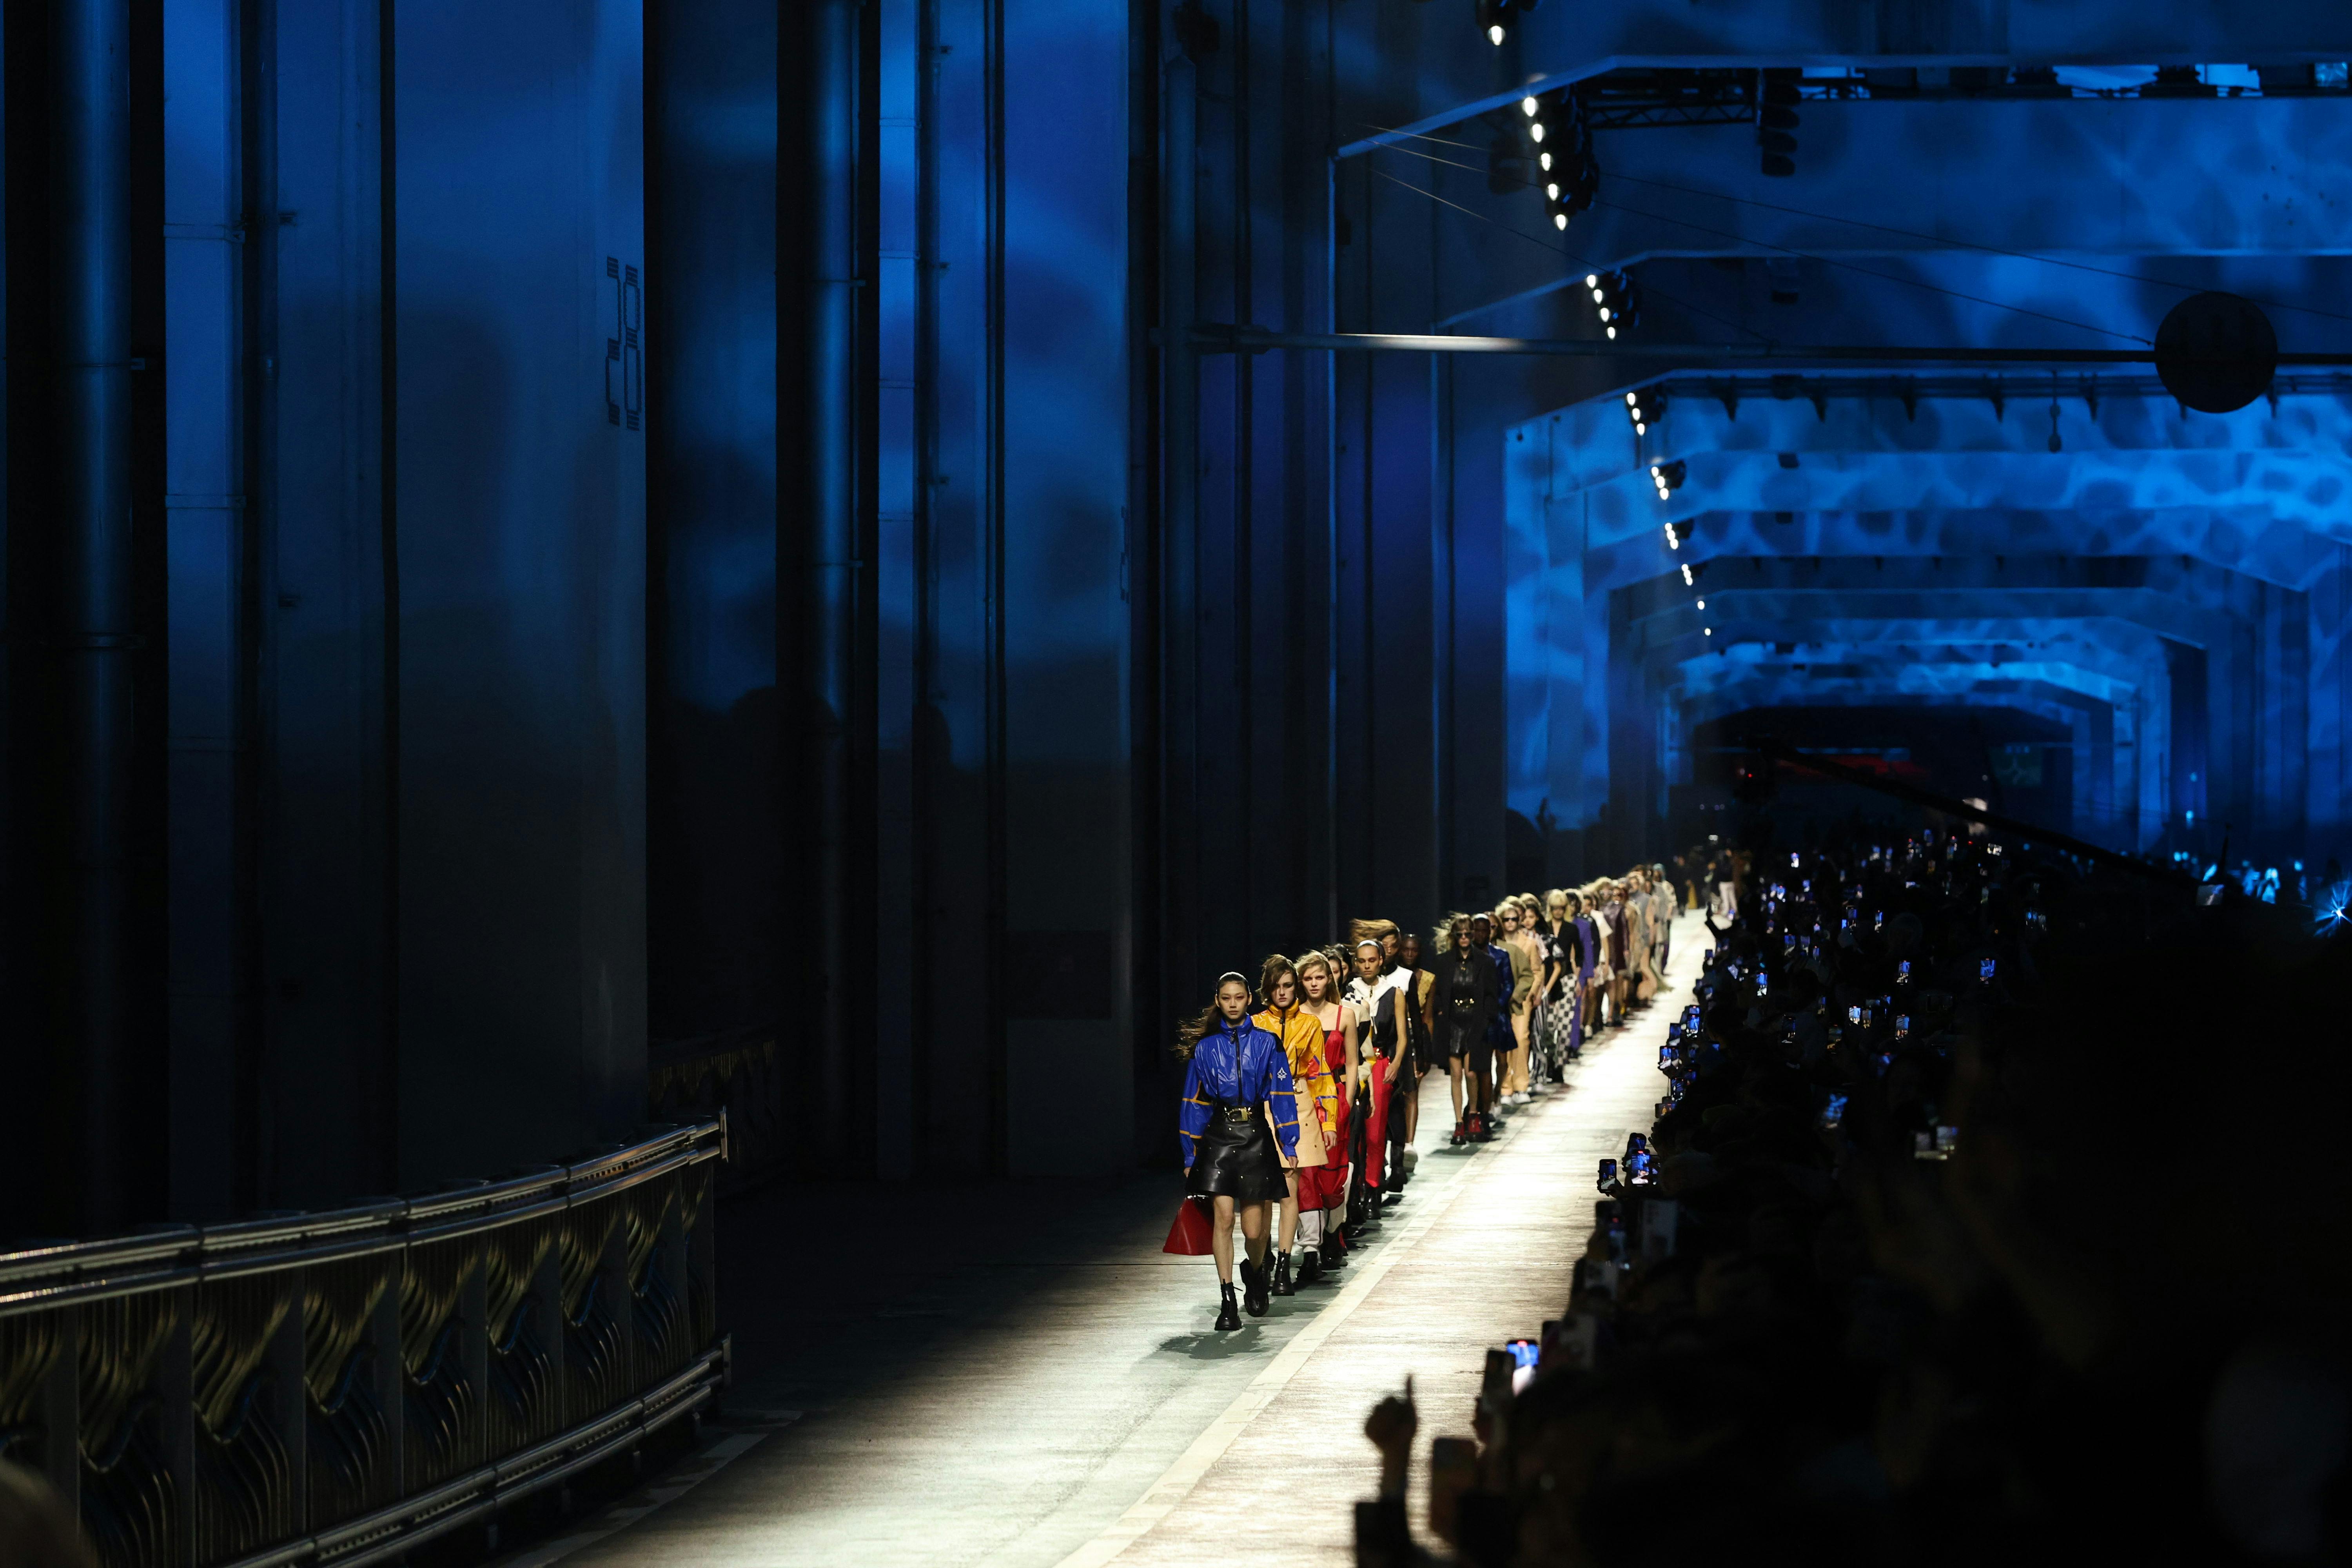 Louis Vuitton 2023 Pre-Fall Autumn Womens Runway Collection  Denim Jeans  Fashion Week Runway Catwalks, Fashion Shows, Season Collections Lookbooks >  Fashion Forward Curation < Trendcast Trendsetting Forecast Styles Spring  Summer Fall